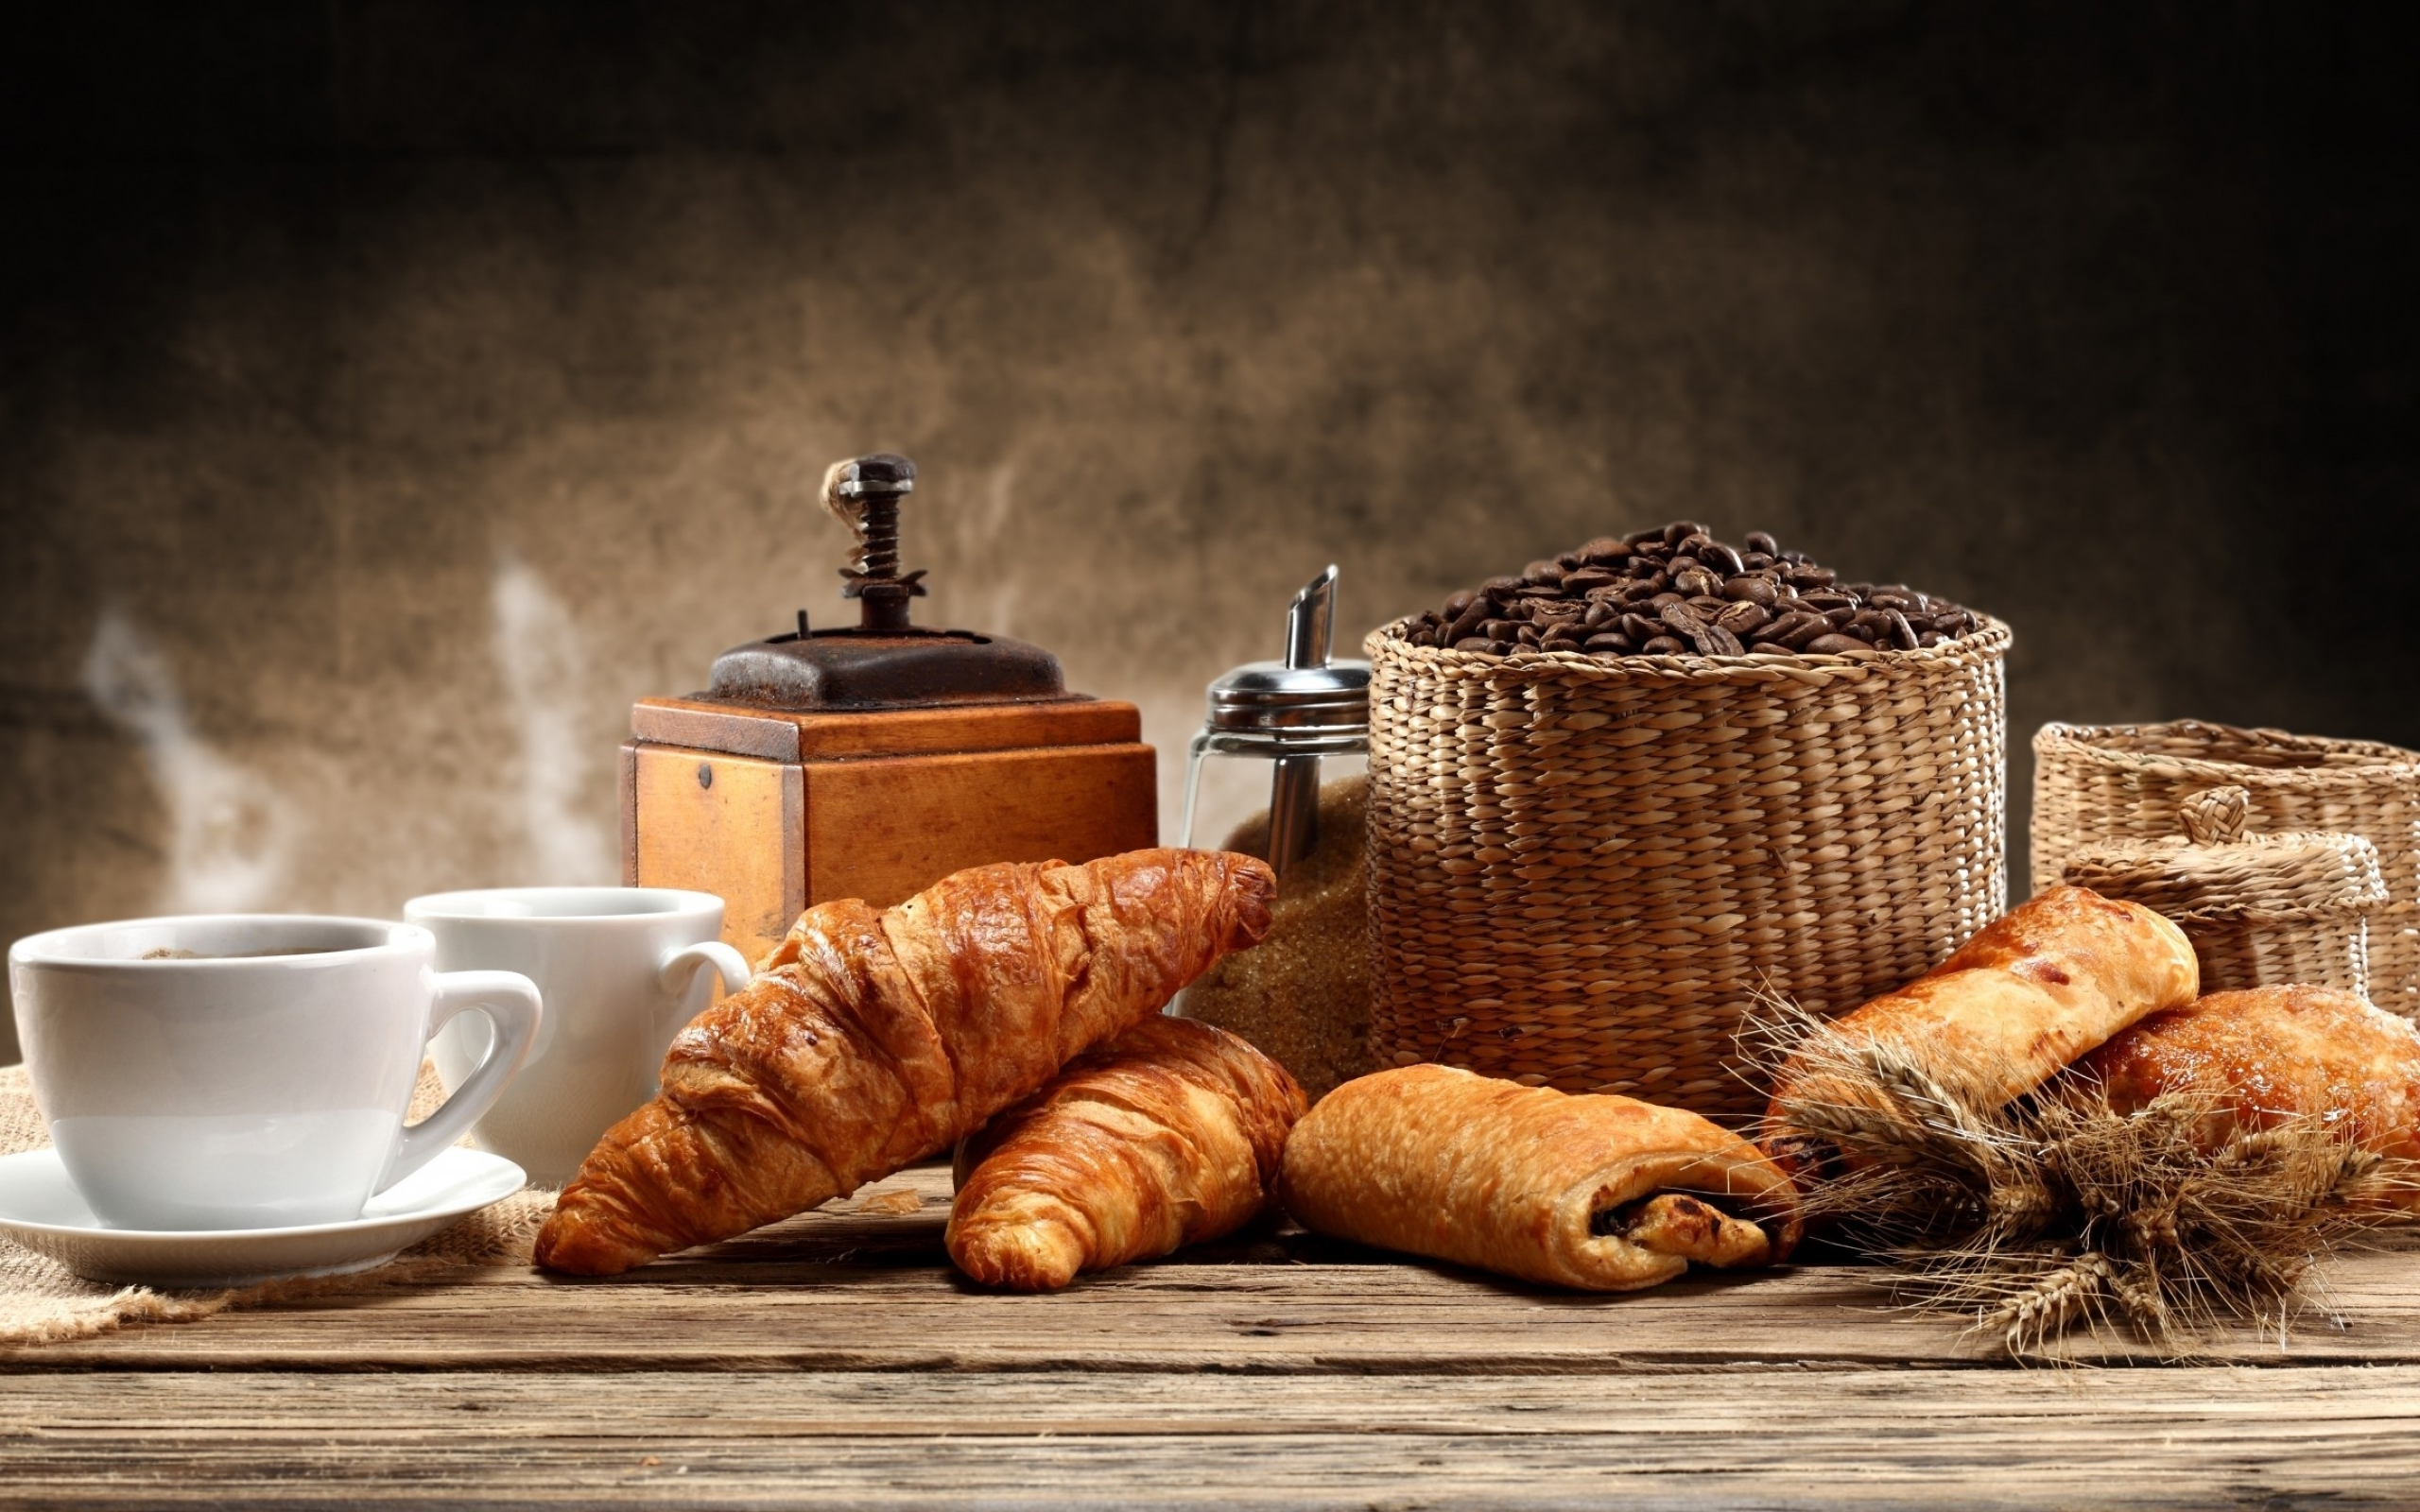 Croissant: A staple in the French bakery since the 1920s, Dish. 2560x1600 HD Wallpaper.